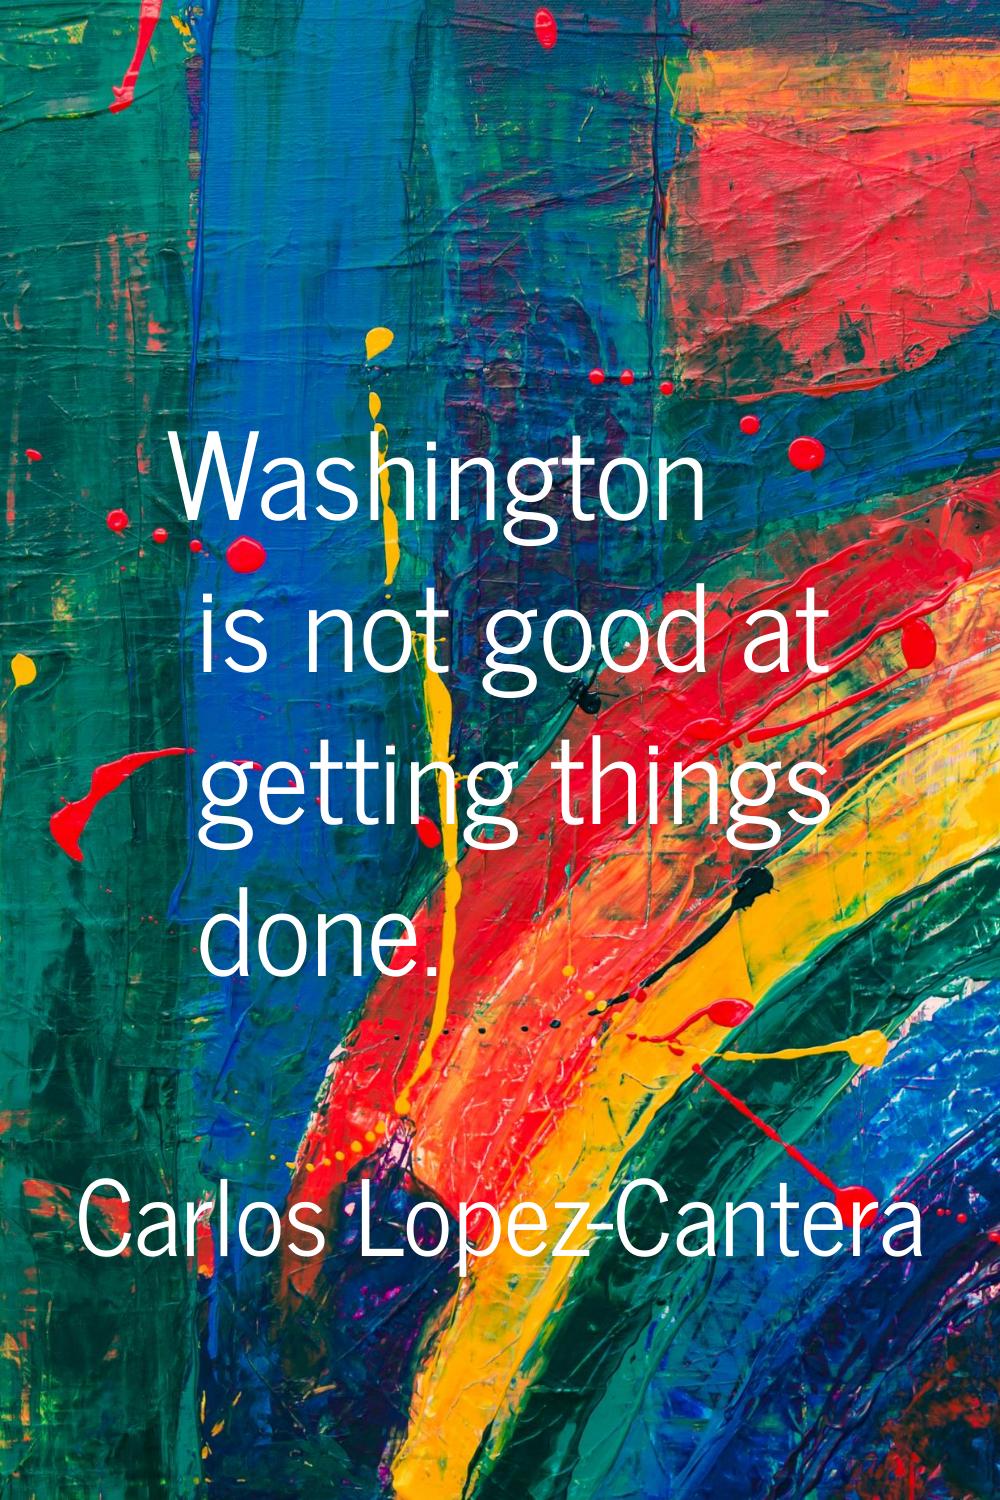 Washington is not good at getting things done.